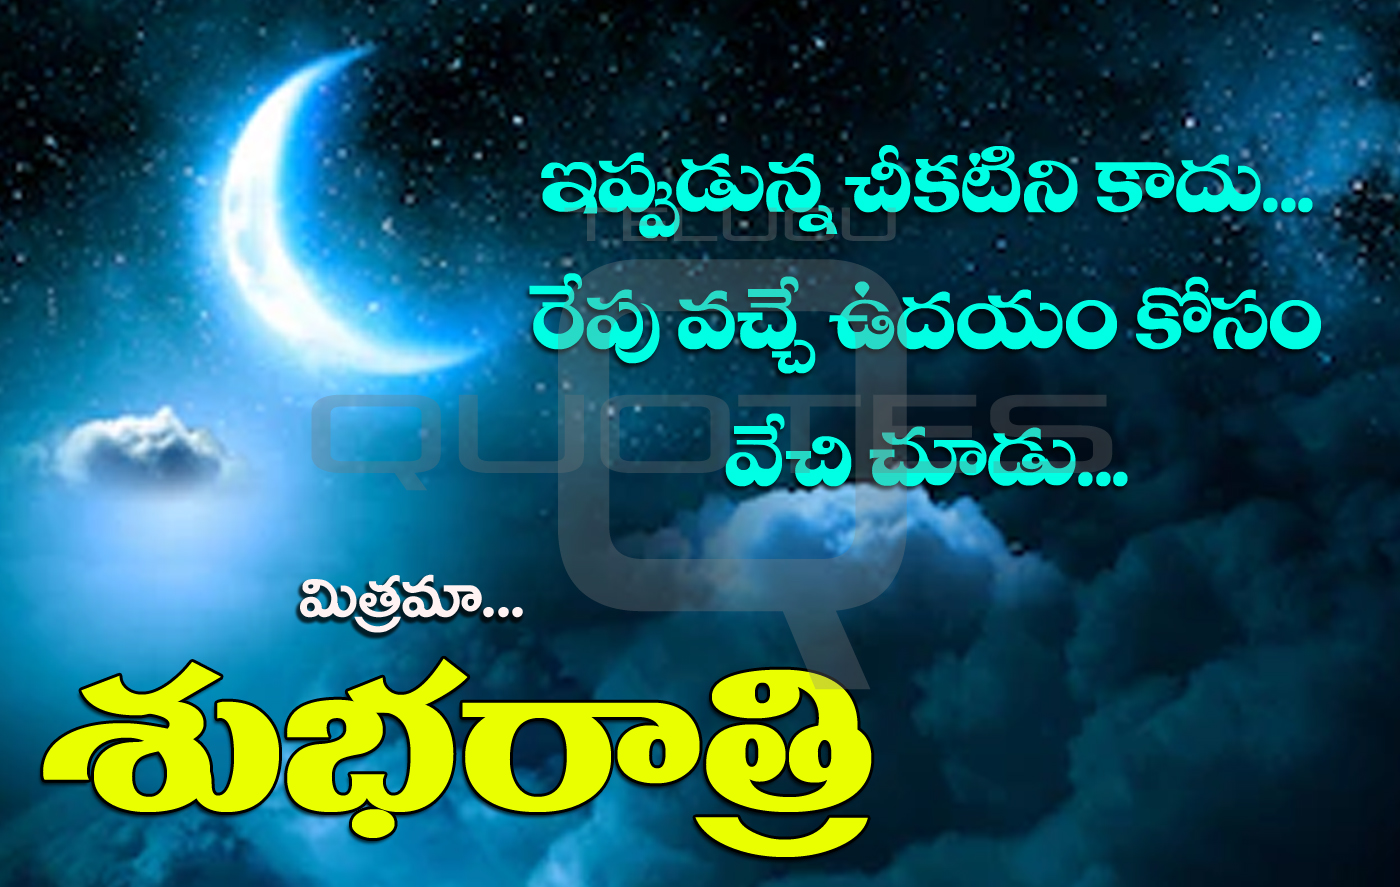 35+ Telugu Good Night Images HD Wallpapers Best Good Night SMS Messages ...